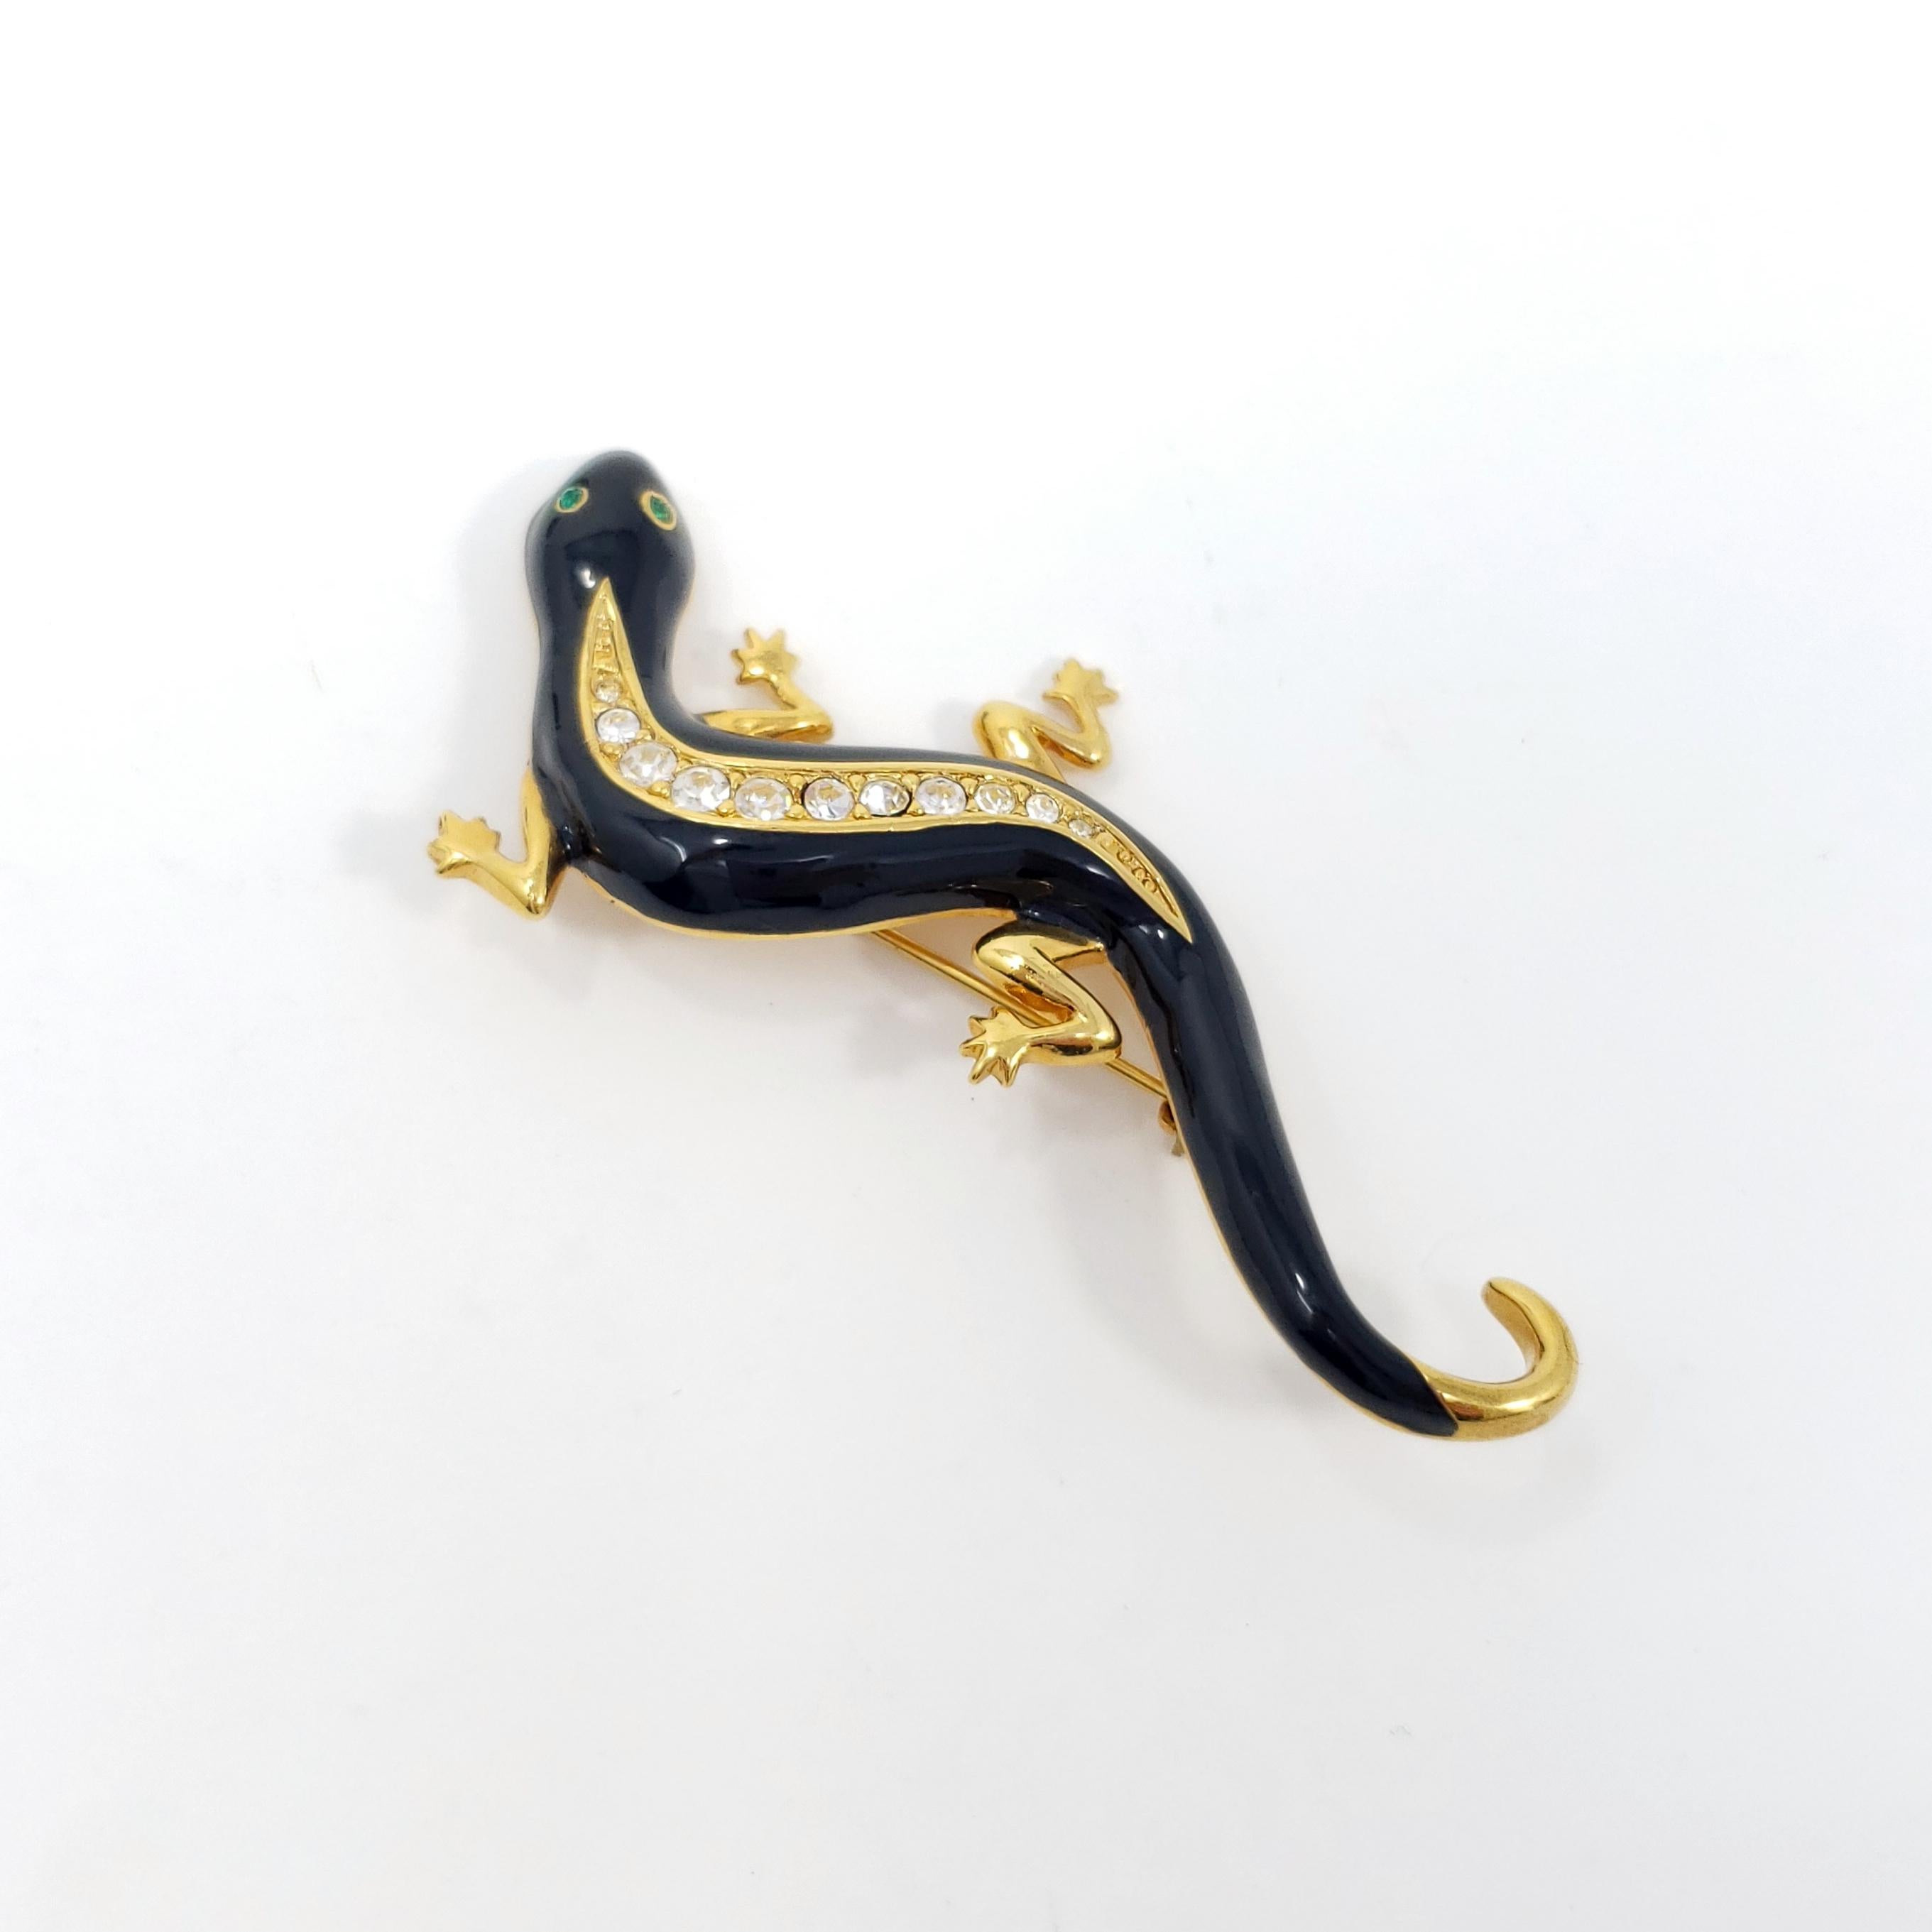 Vintage Avon brooch, featuring a dazzling salamander decorated with crystals and black enamel.

Gold-plated.

Marks / hallmarks: Avon